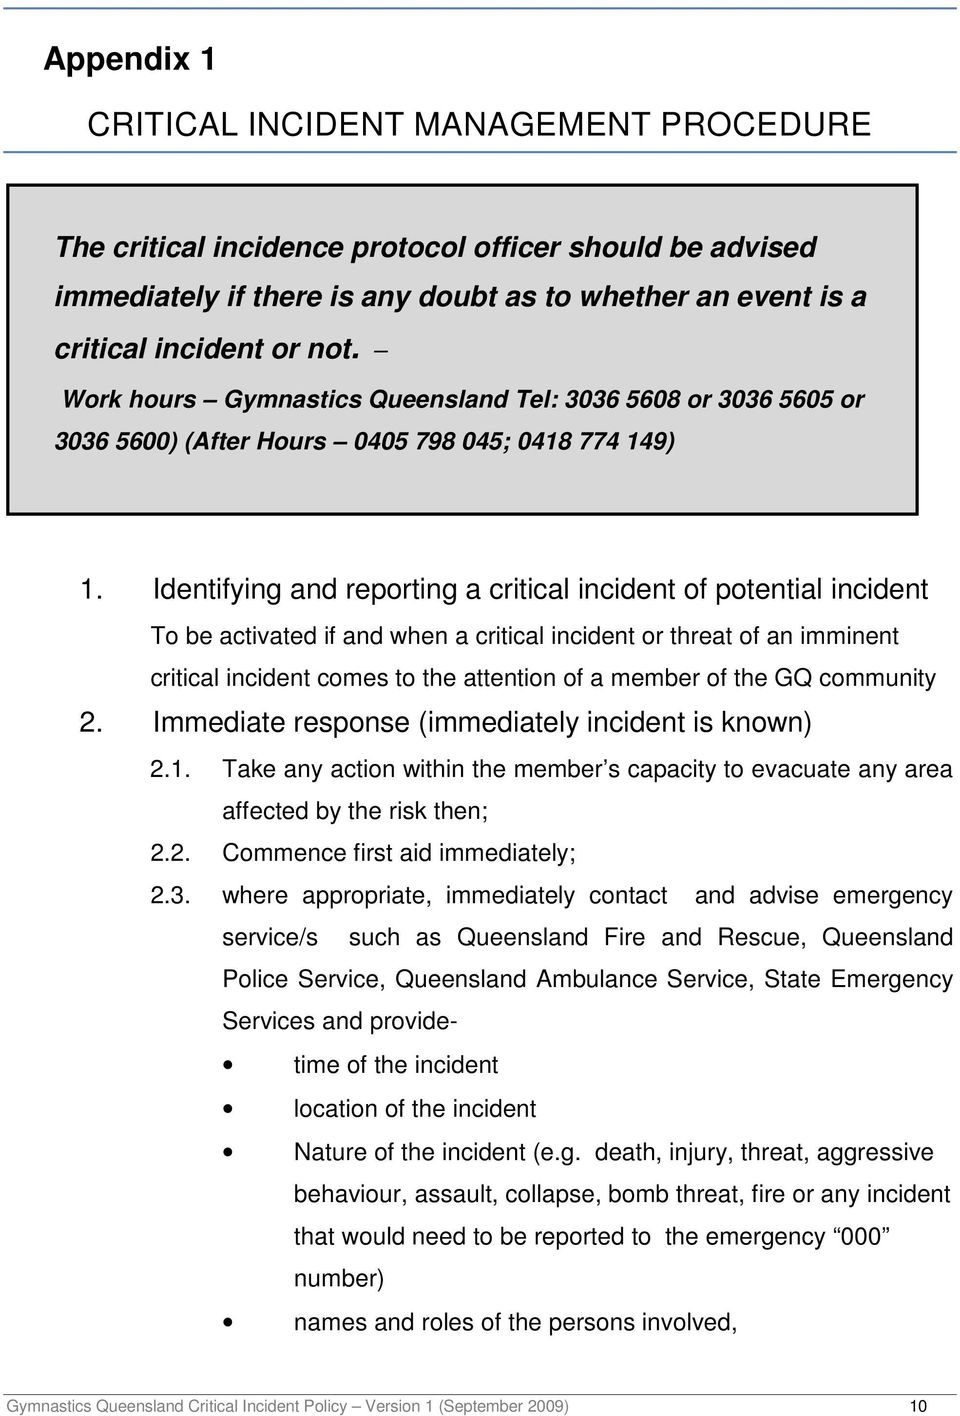 Identifying and reporting a critical incident of potential incident To be activated if and when a critical incident or threat of an imminent critical incident comes to the attention of a member of